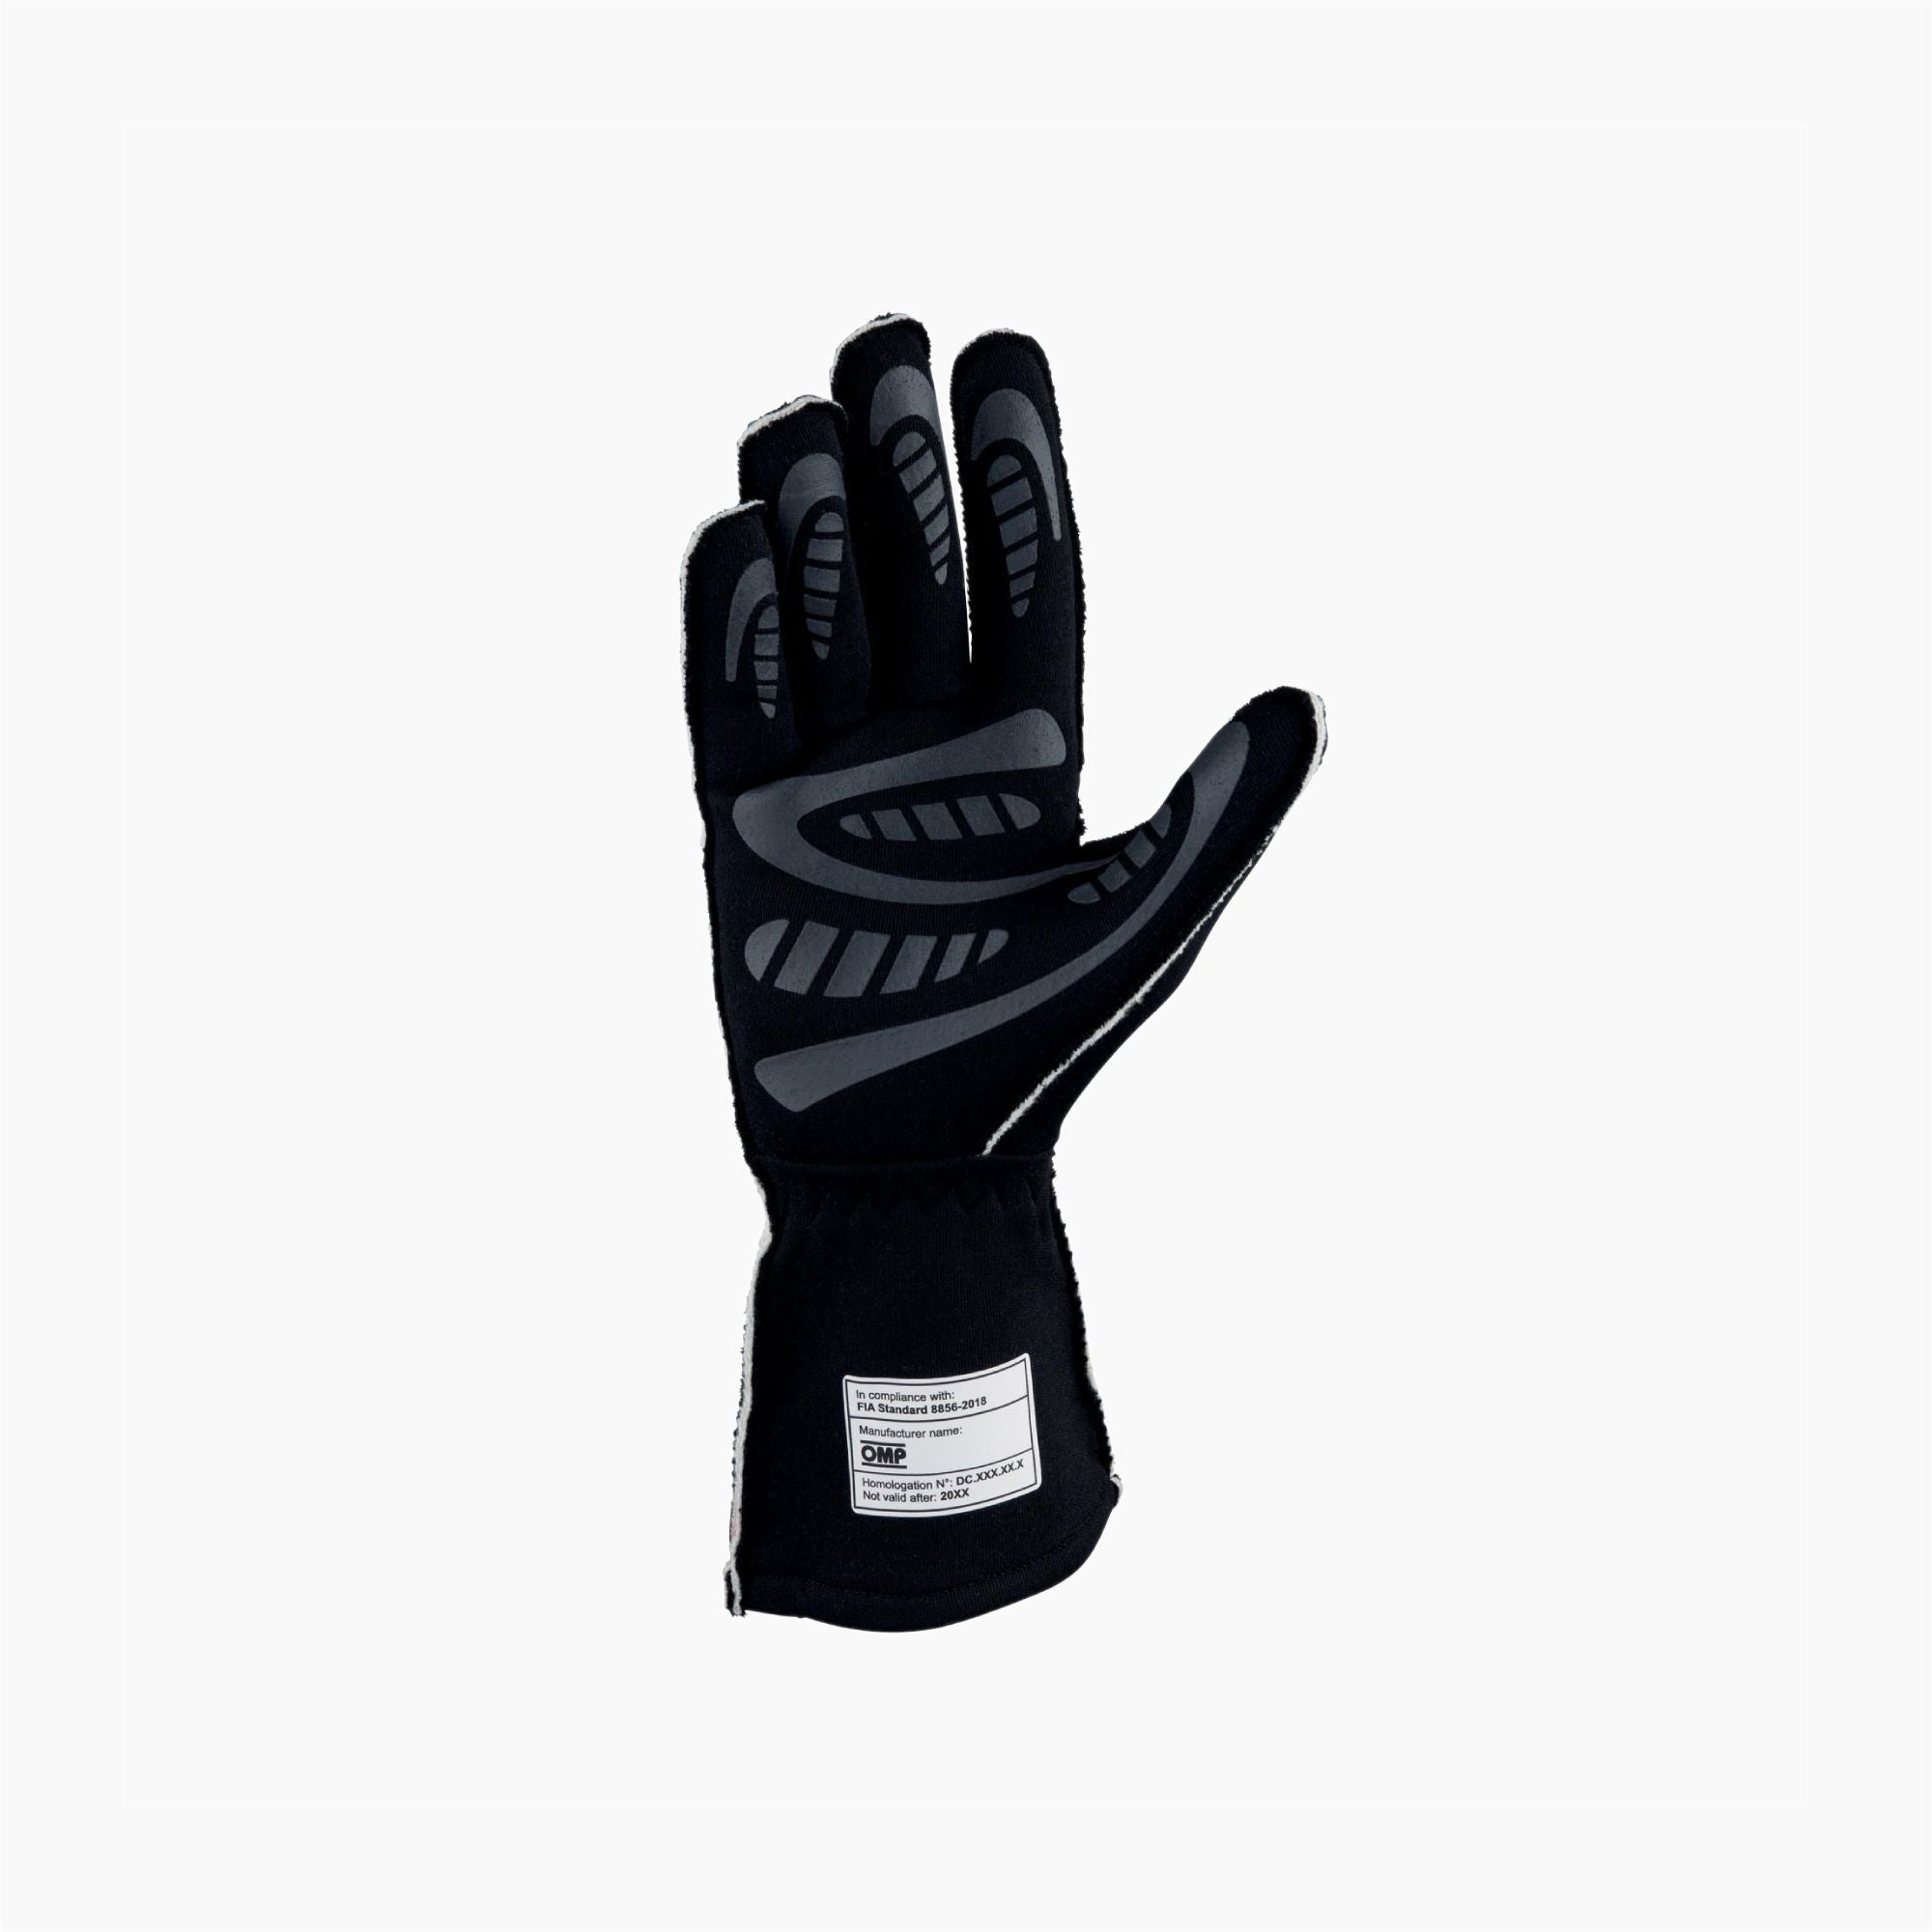 OMP | First EVO Racing Gloves-Racing Gloves-OMP-gpx-store